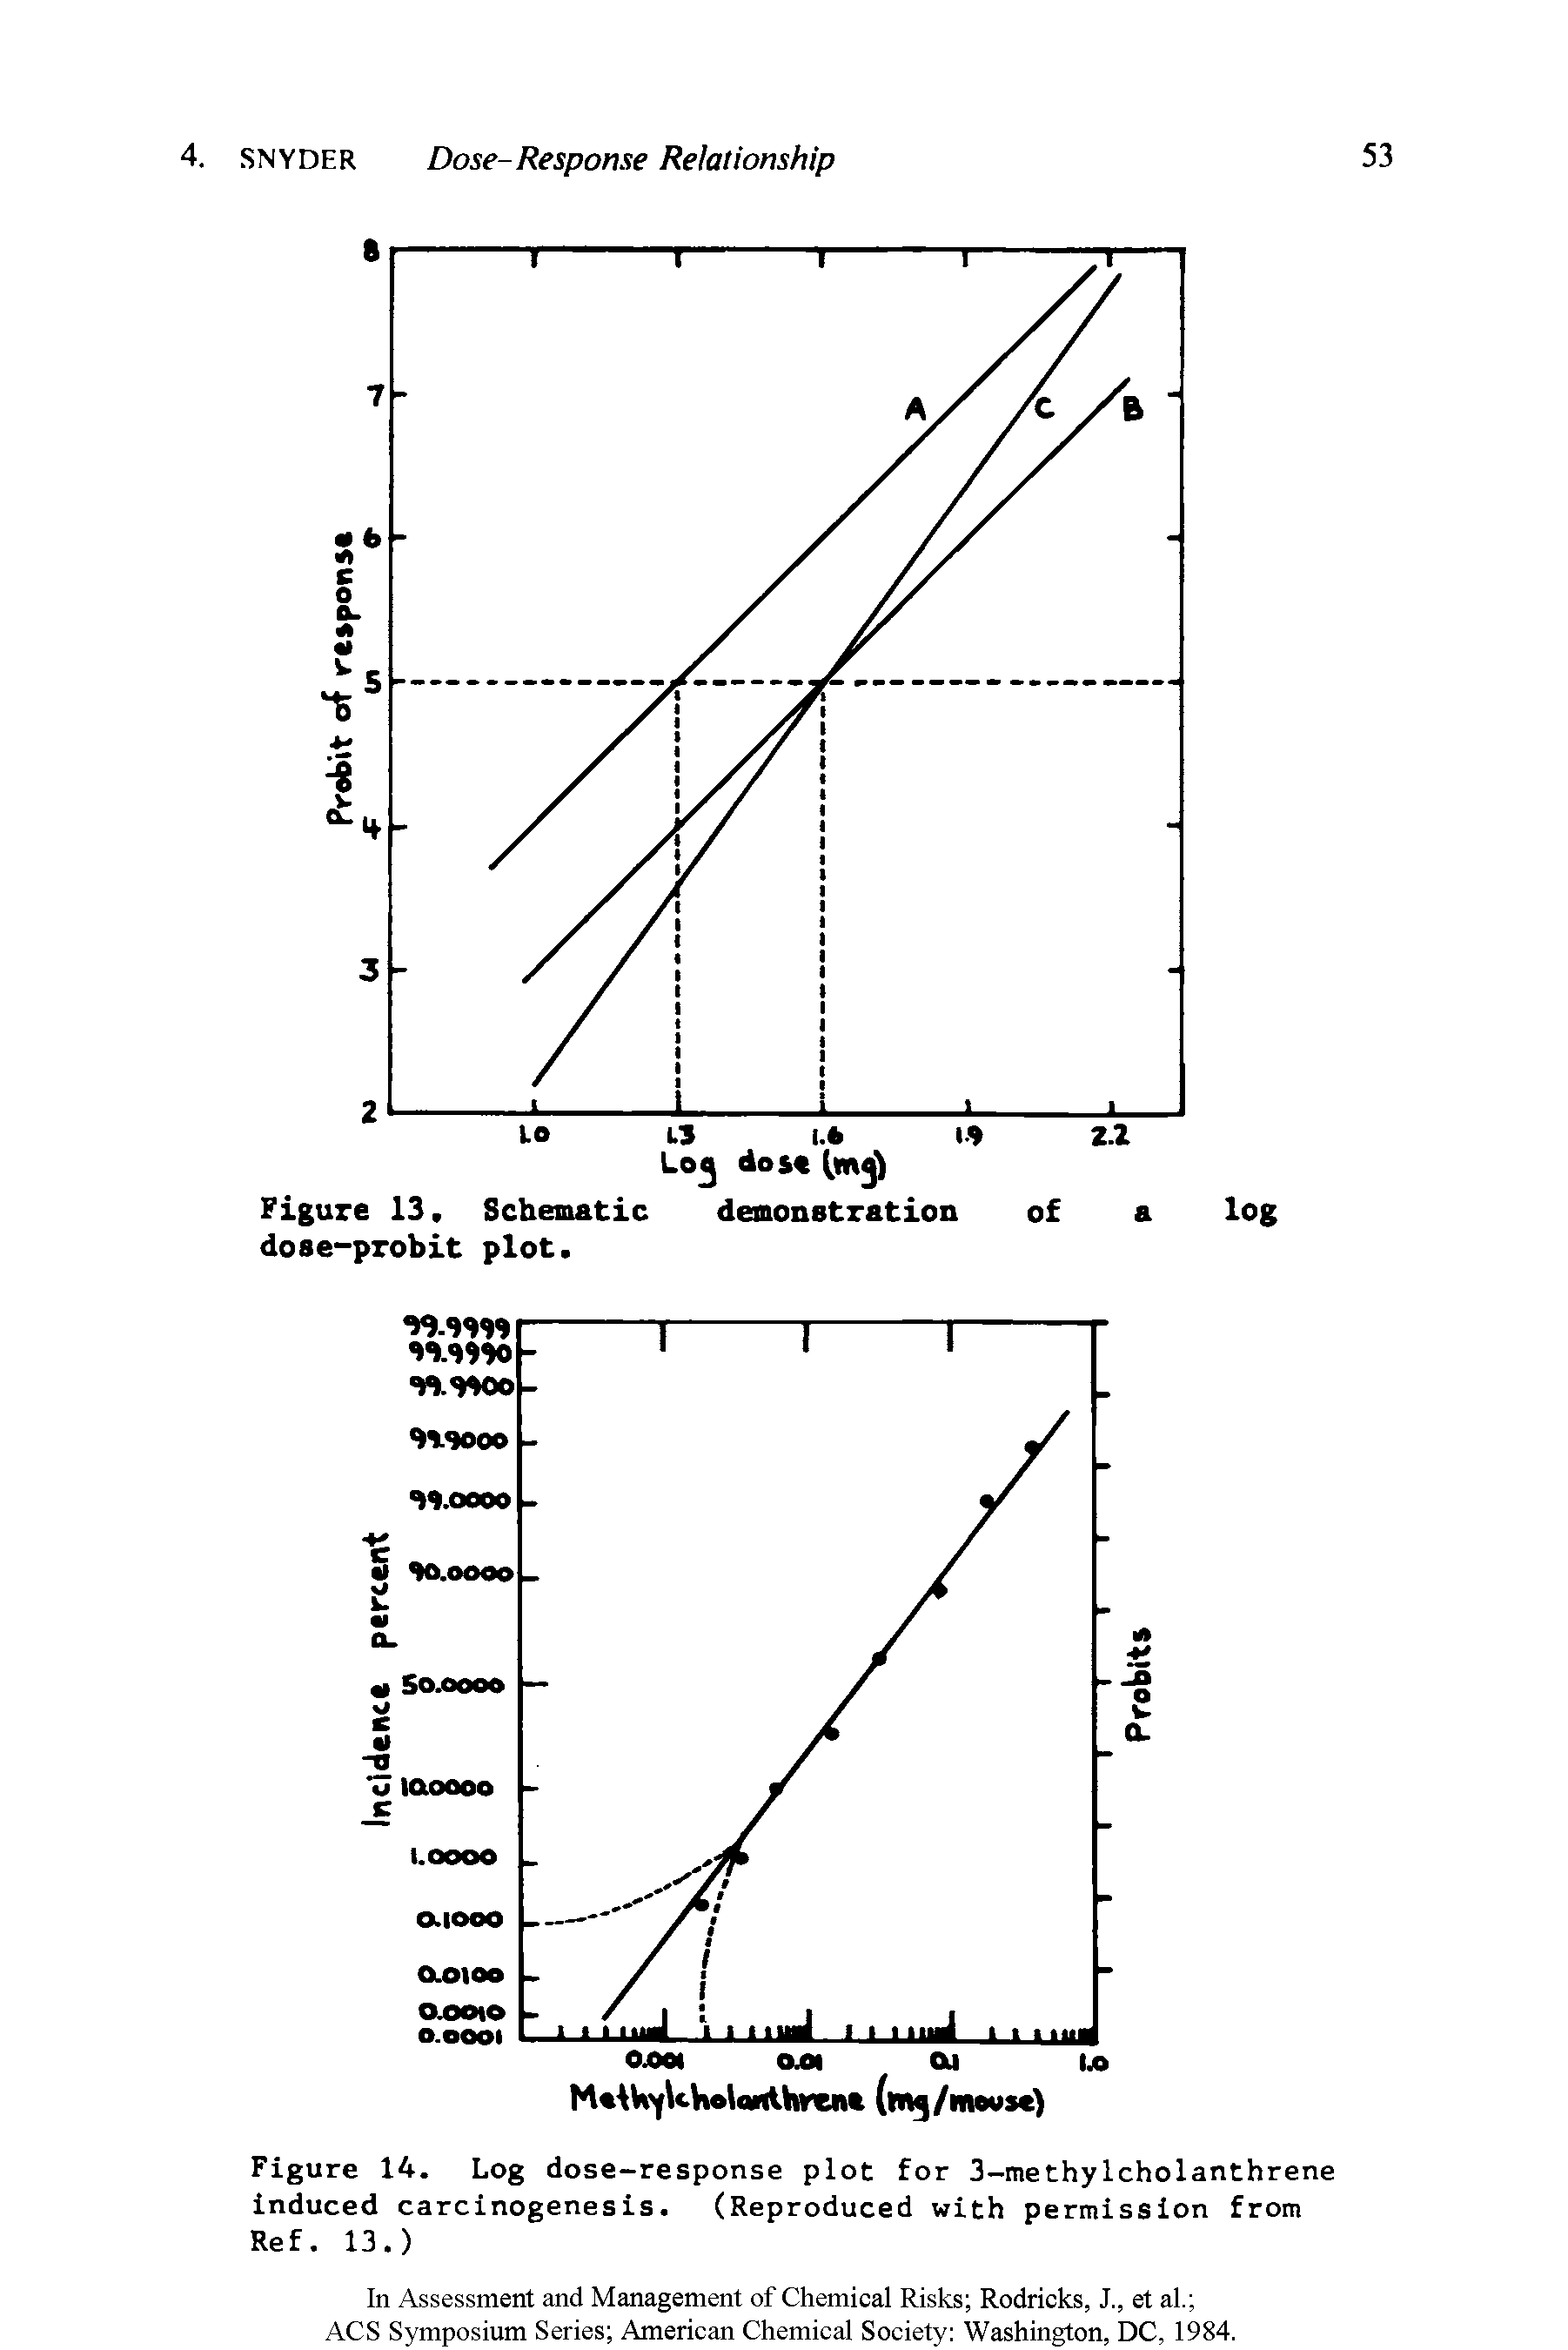 Figure 14. Log dose-response plot for 3-methyIcholanthrene Induced carcinogenesis. (Reproduced with permission from Ref. 13.)...